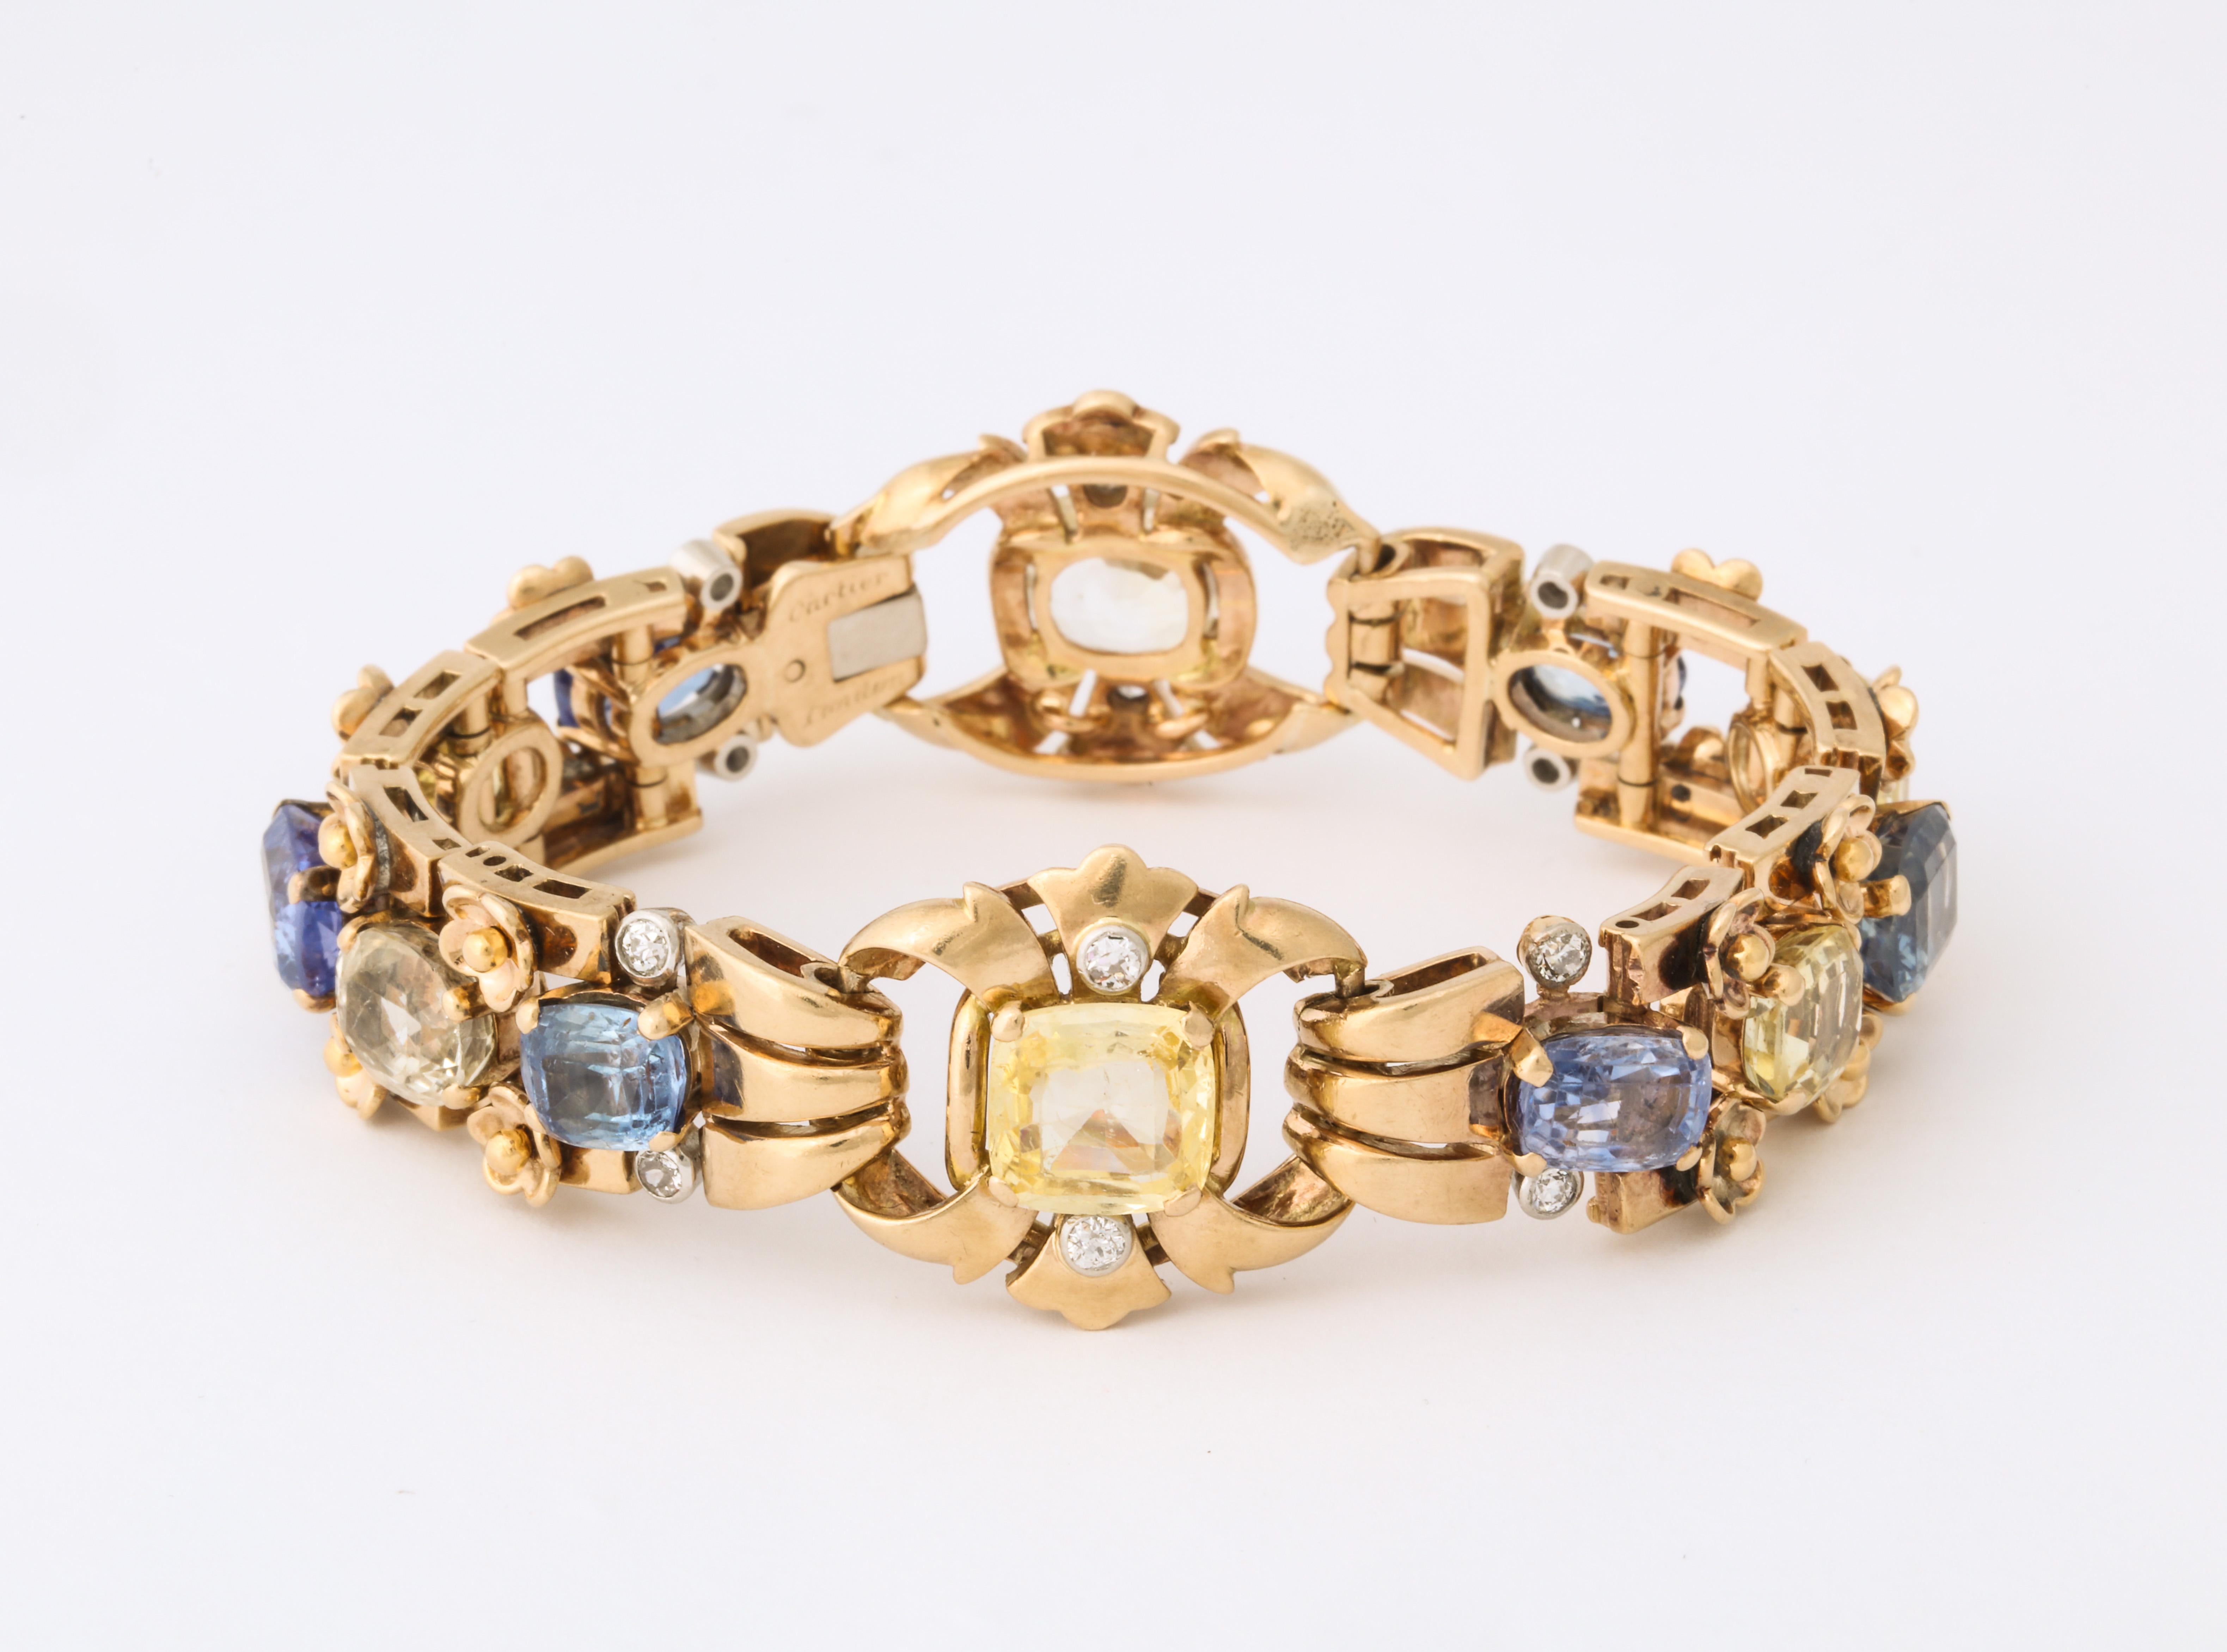 Pastel blue and yellow cushion cut sapphires are alternately set and highlighted with diamonds in this elegant vintage Cartier bracelet.  Made by 